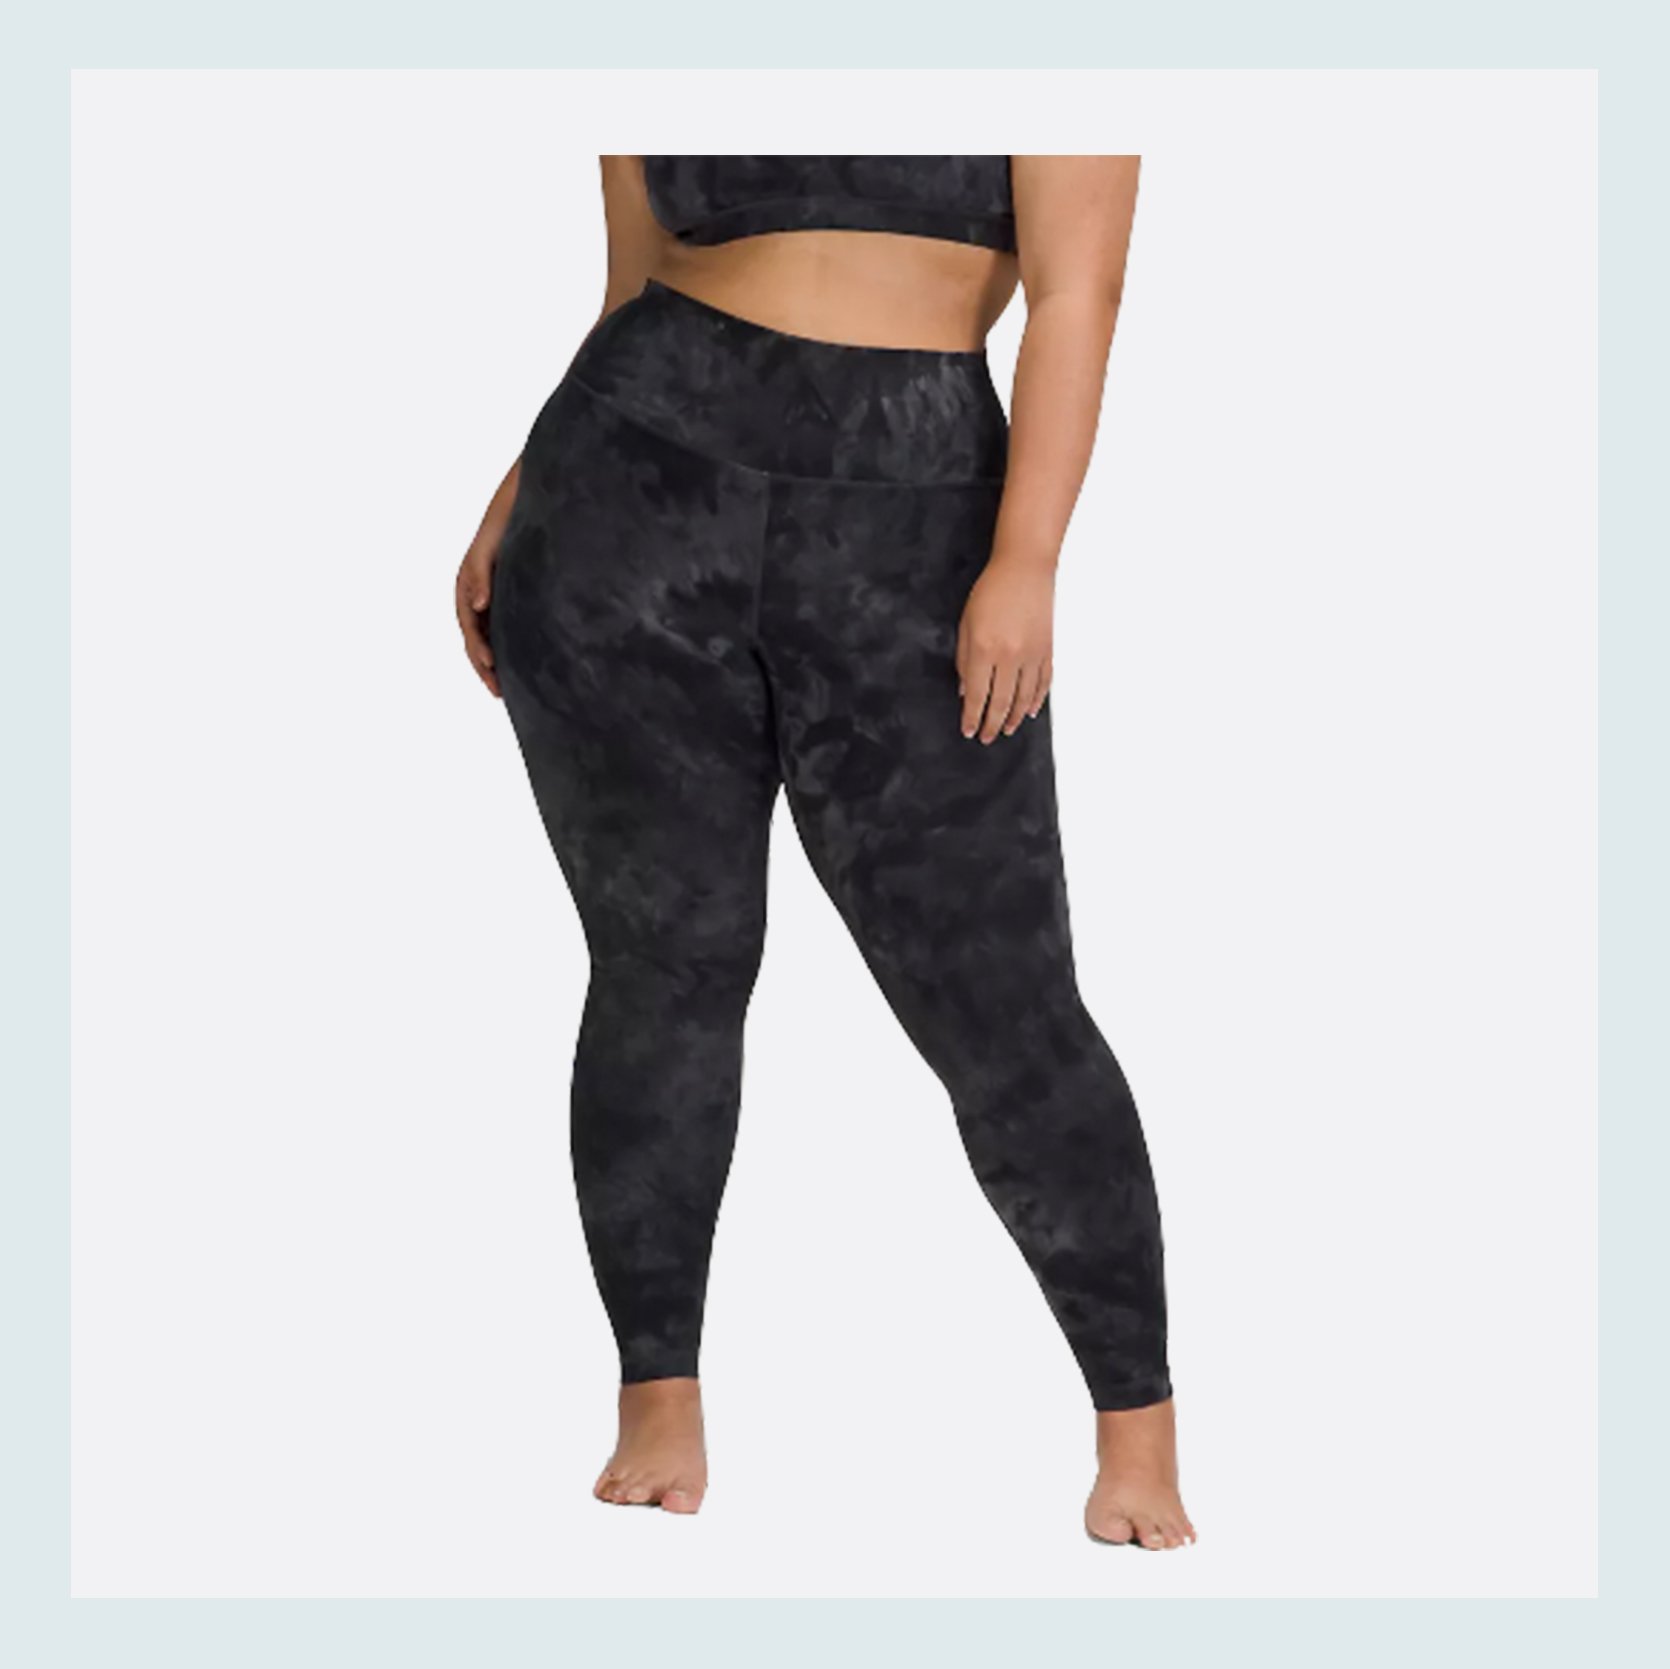 These Plus-Size Leggings Have the Best Reviews